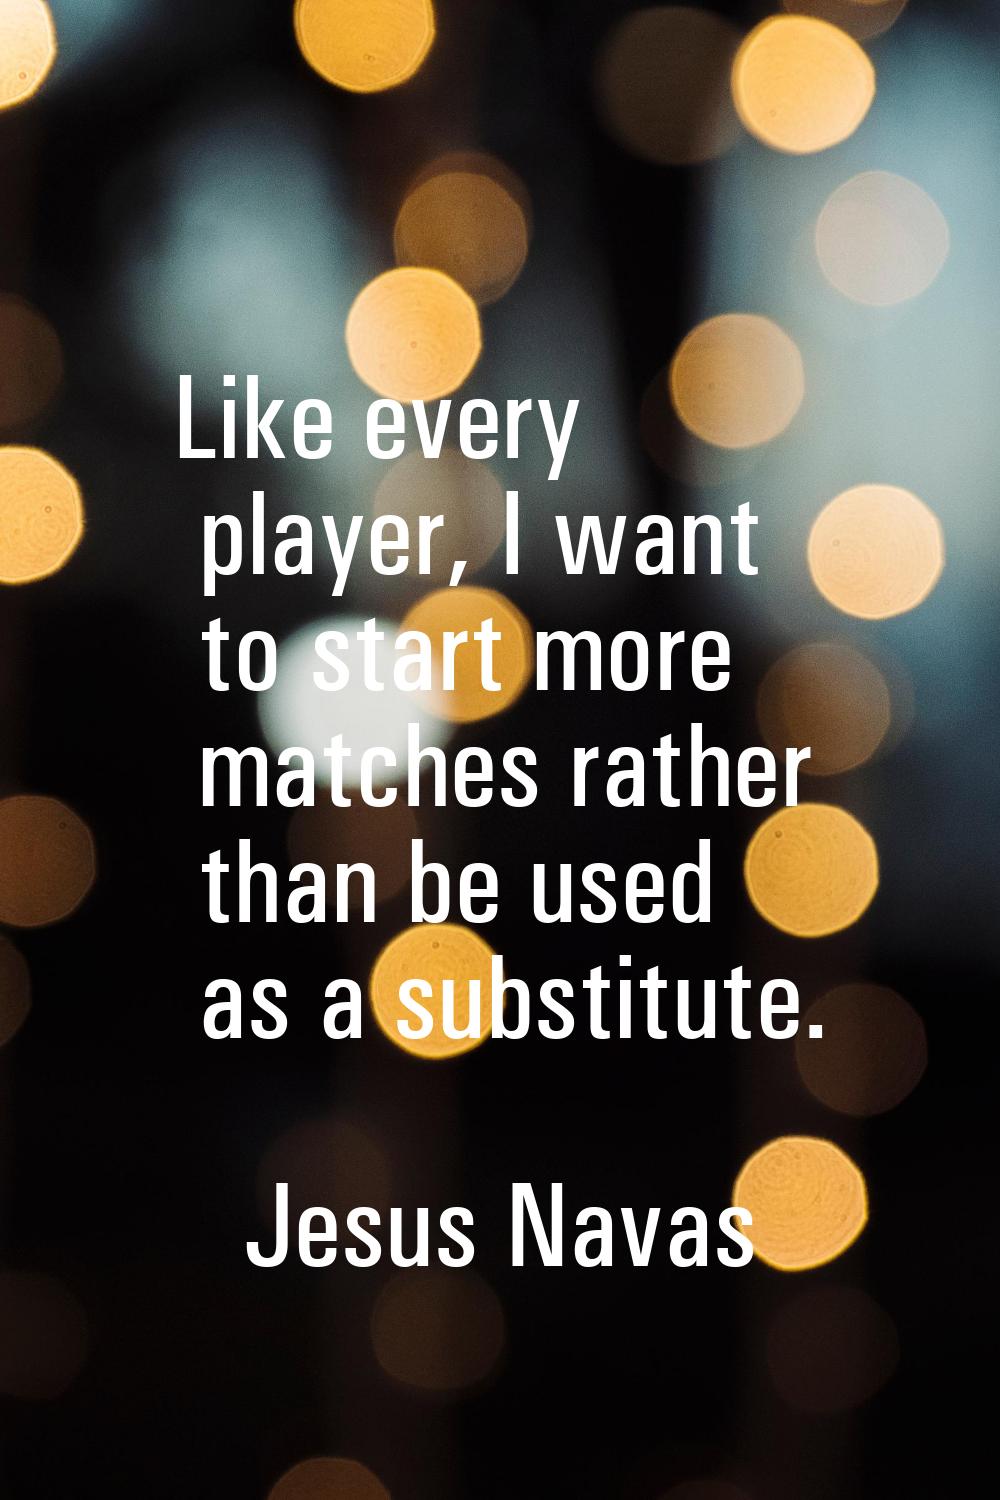 Like every player, I want to start more matches rather than be used as a substitute.